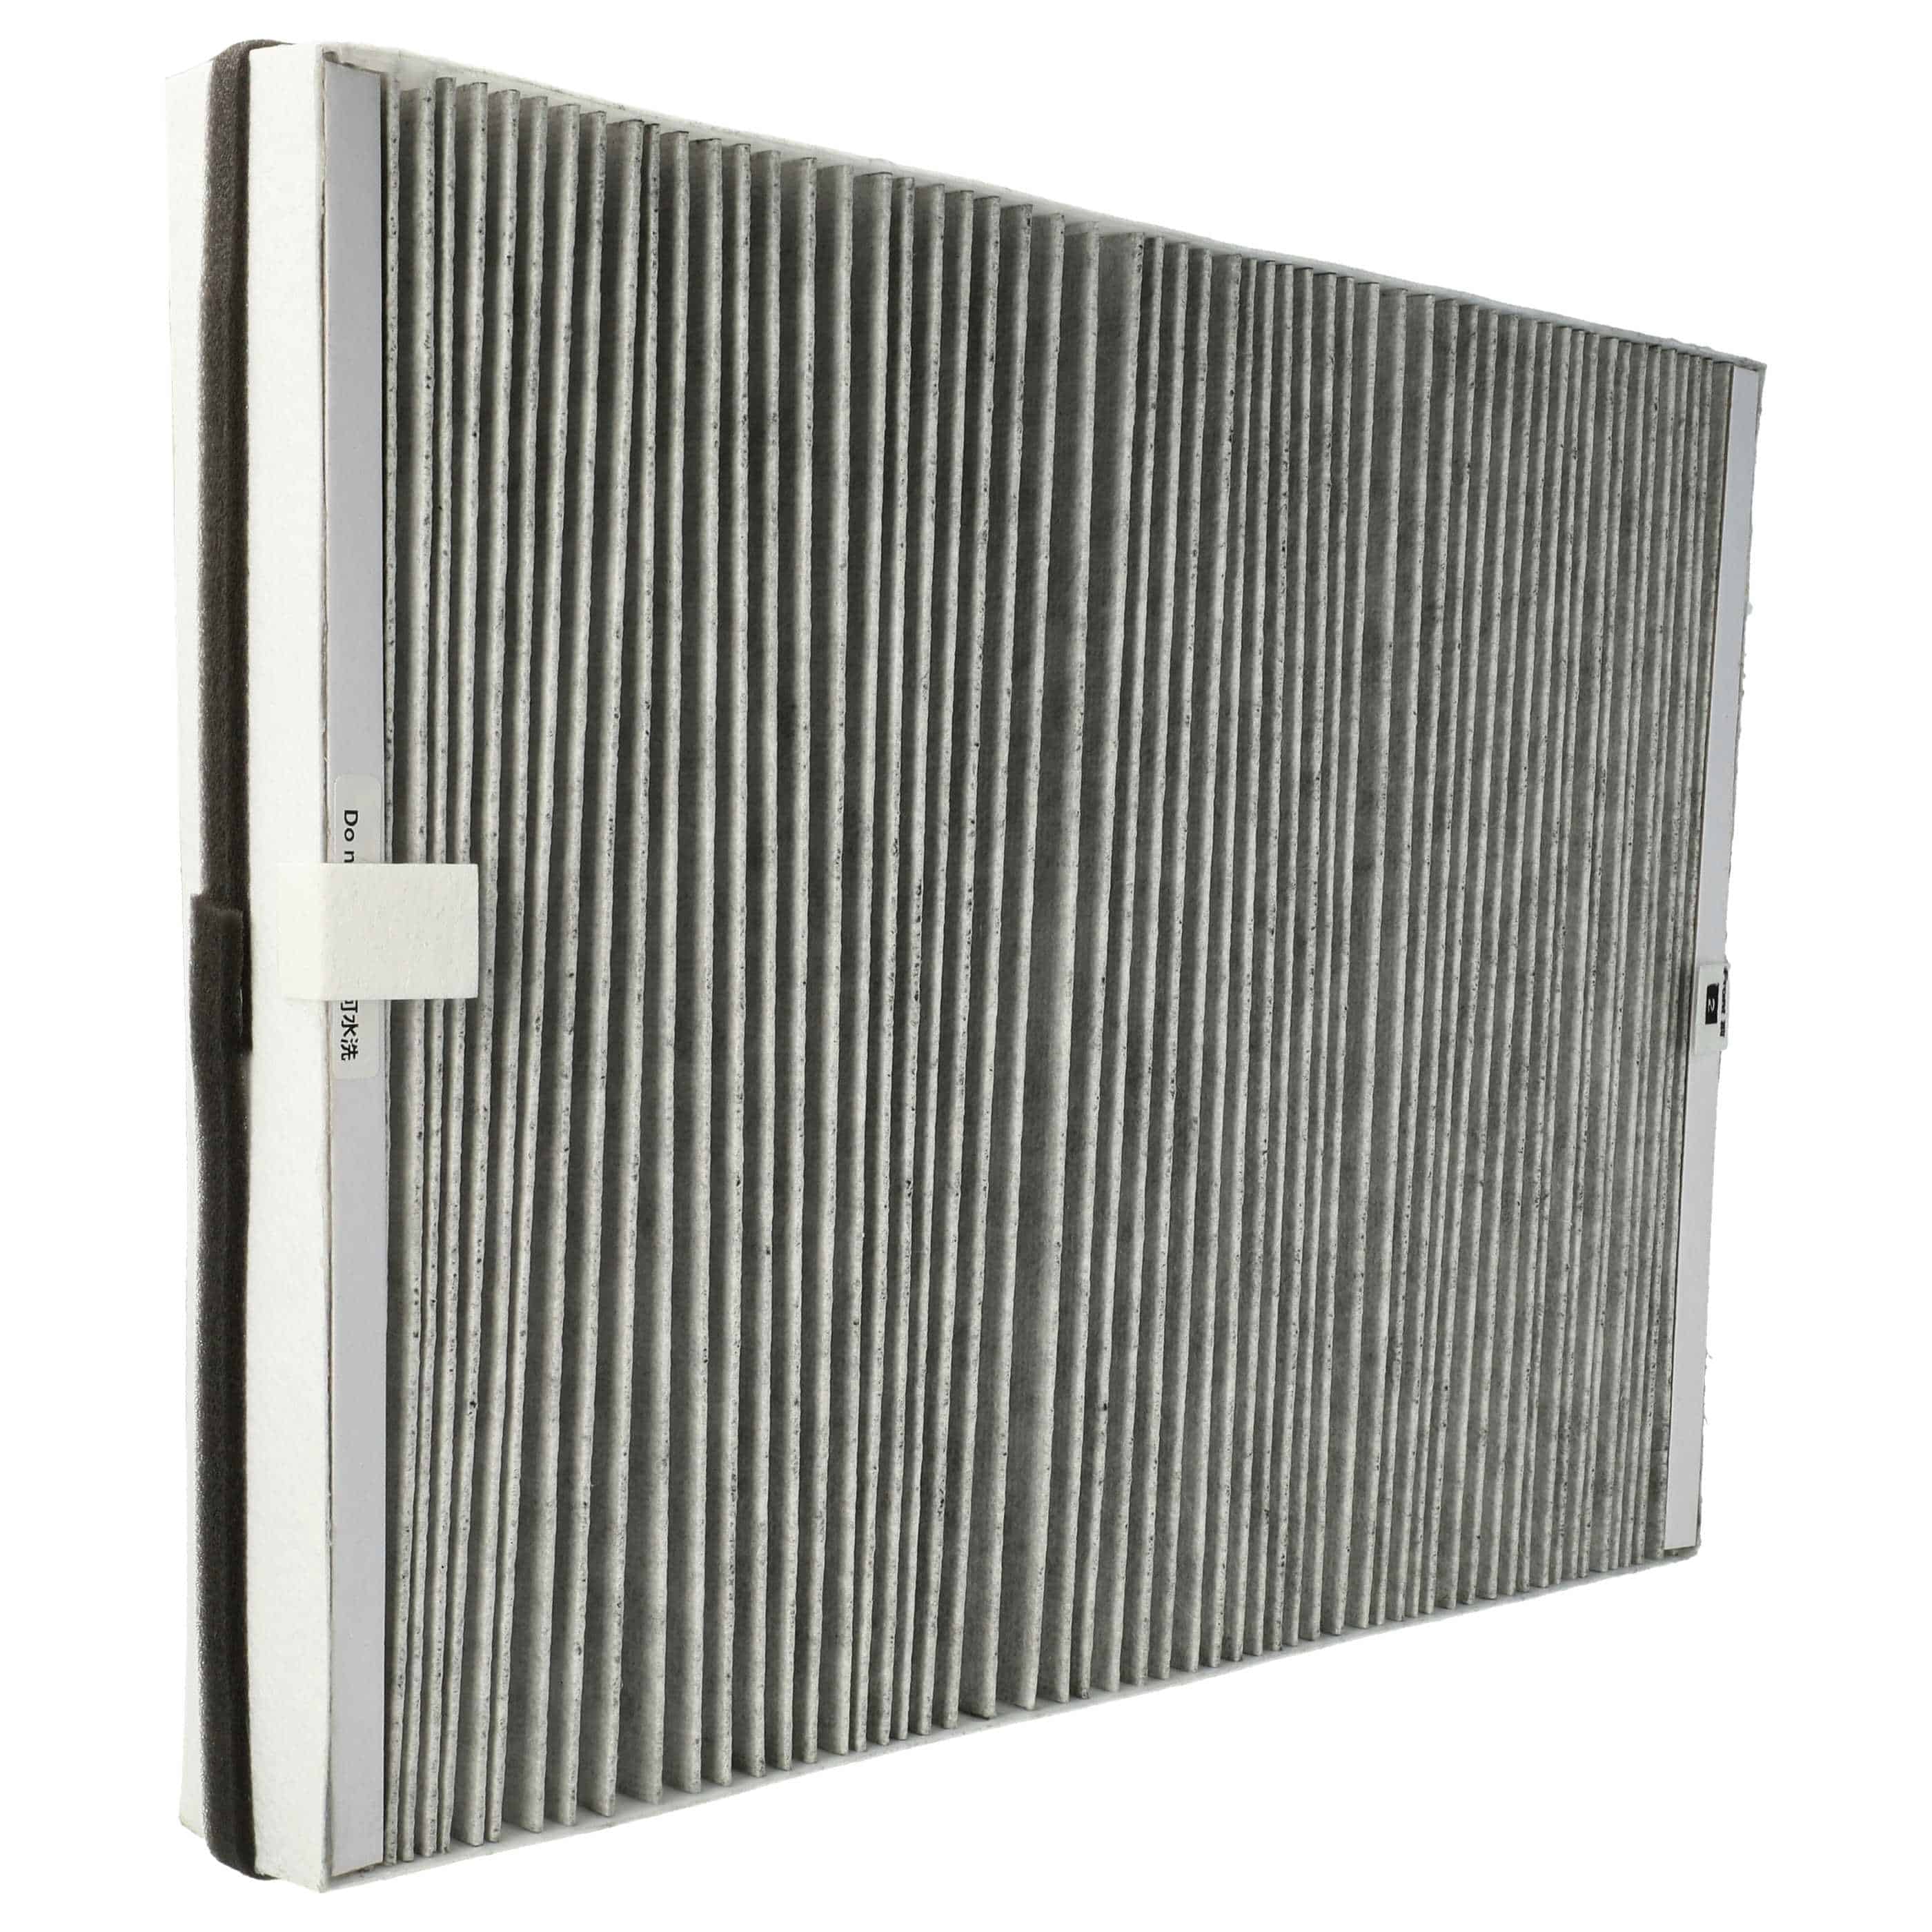 Filter as Replacement for Philips AC4147/10 - HEPA + Activated Carbon, 36 x 28 x 4.5 cm